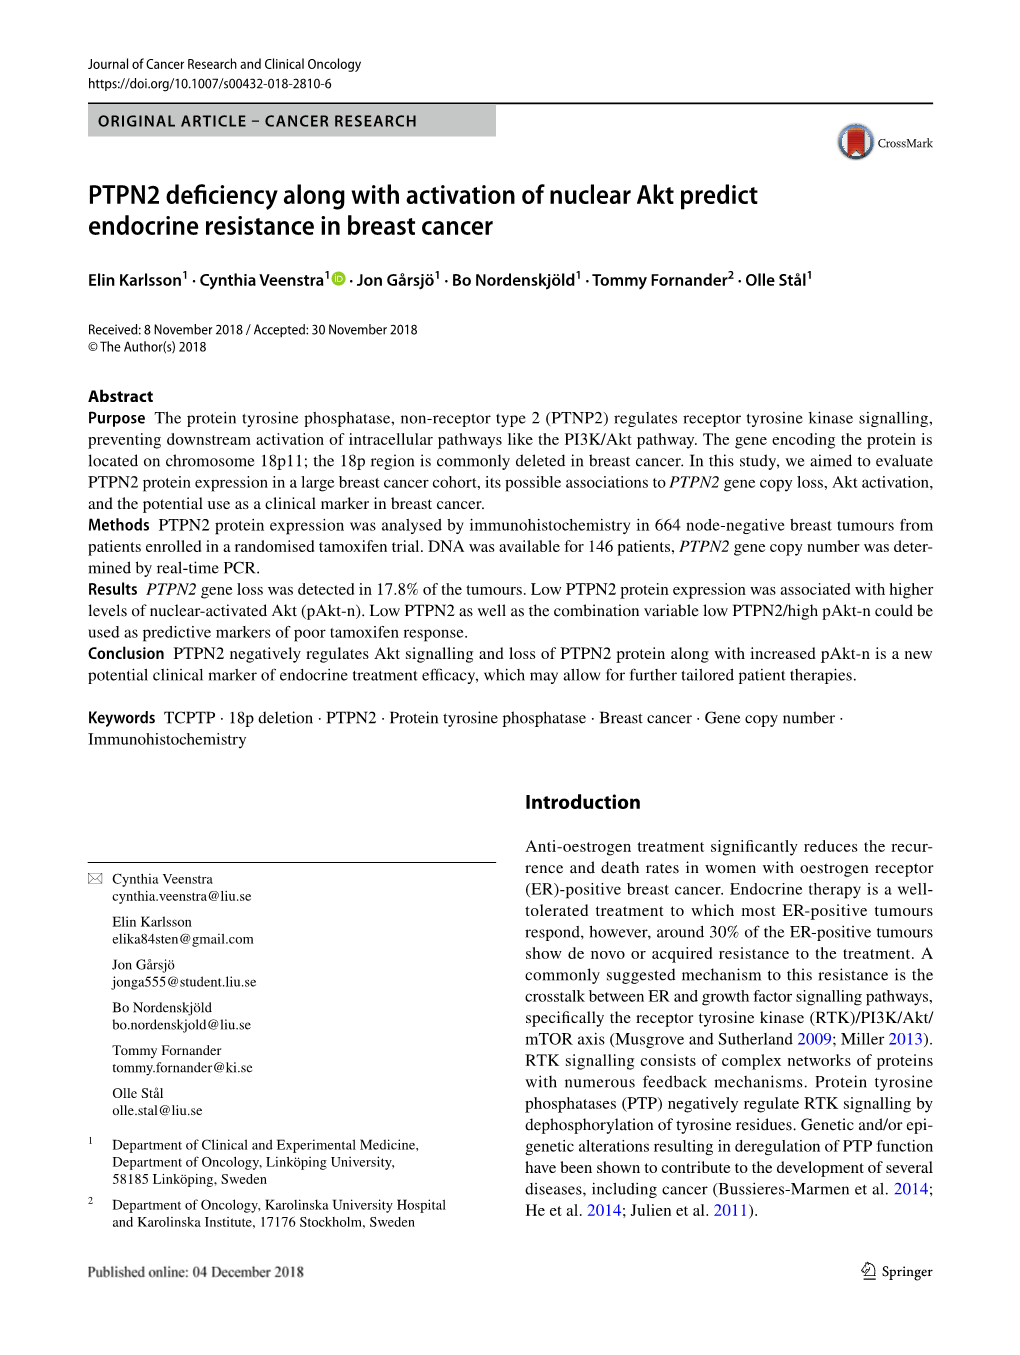 PTPN2 Deficiency Along with Activation of Nuclear Akt Predict Endocrine Resistance in Breast Cancer